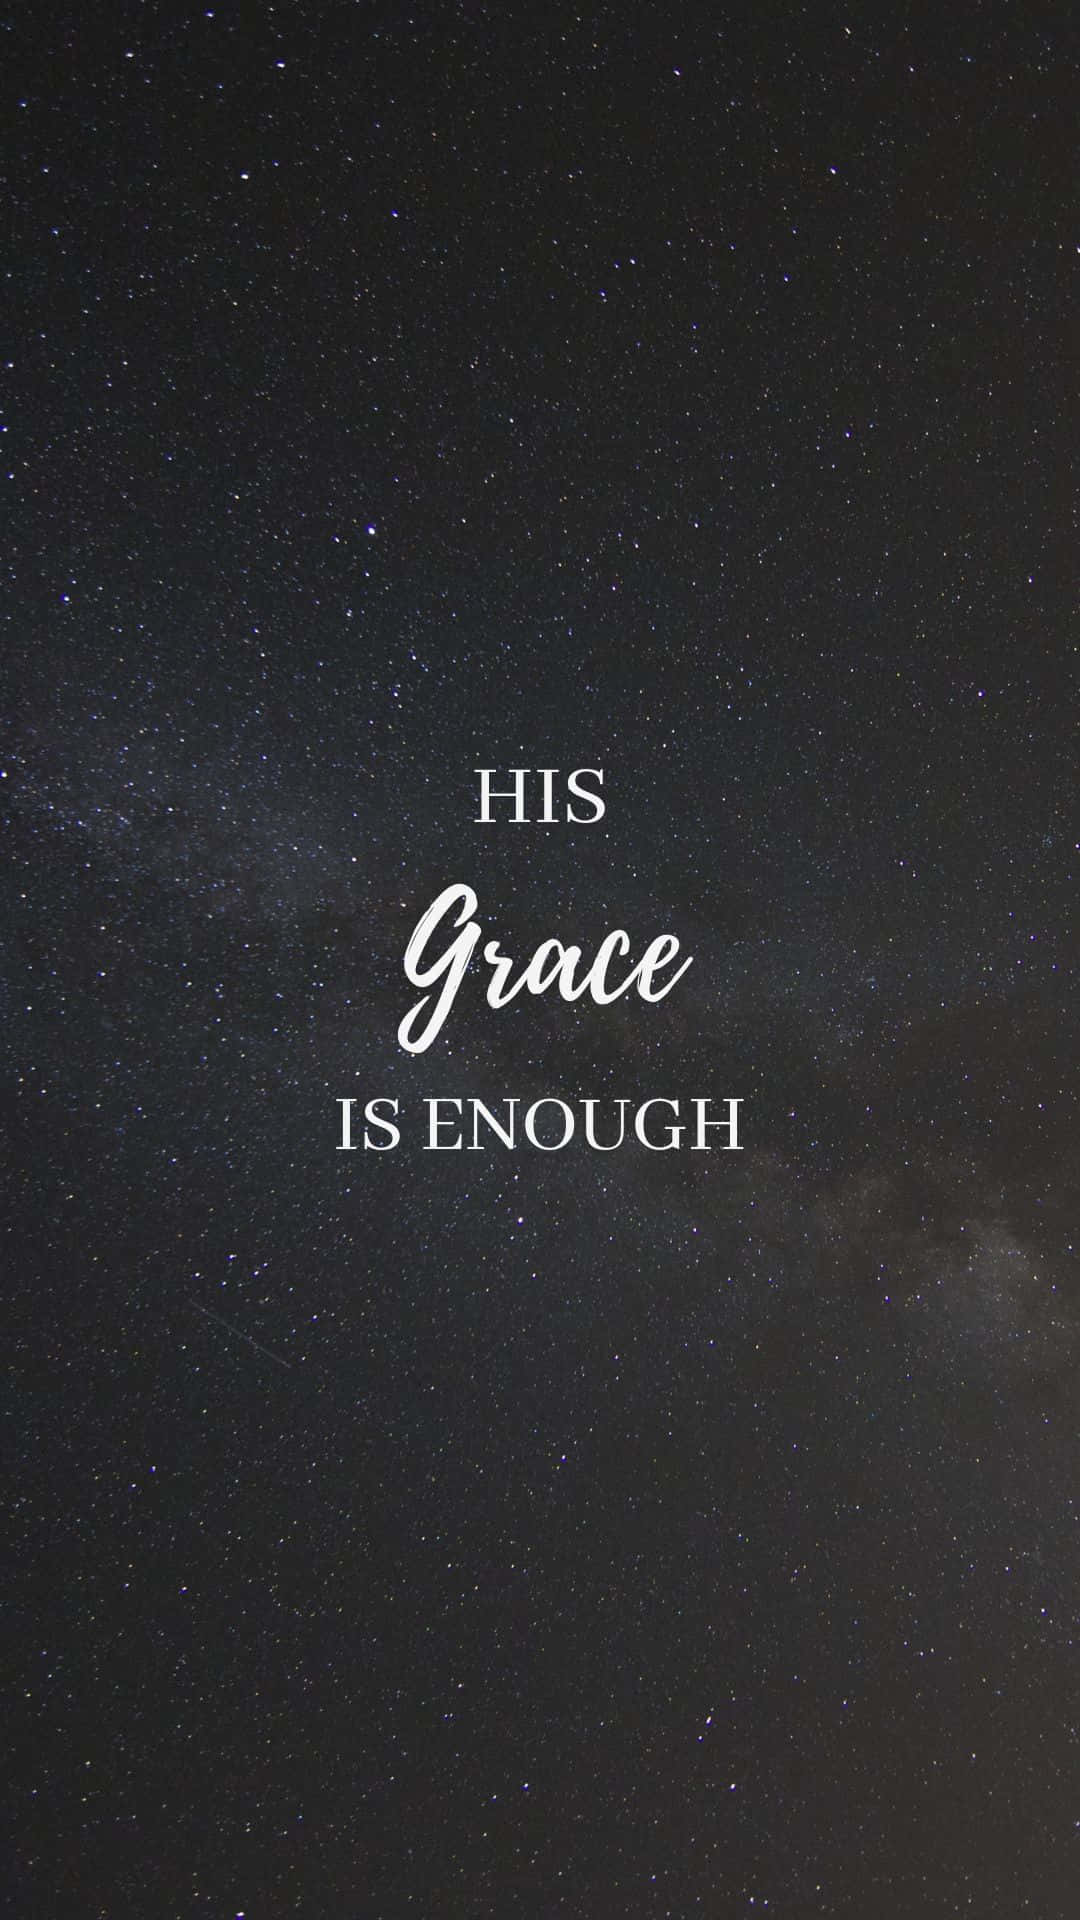 Cool Christian Quote On Stars Wallpaper